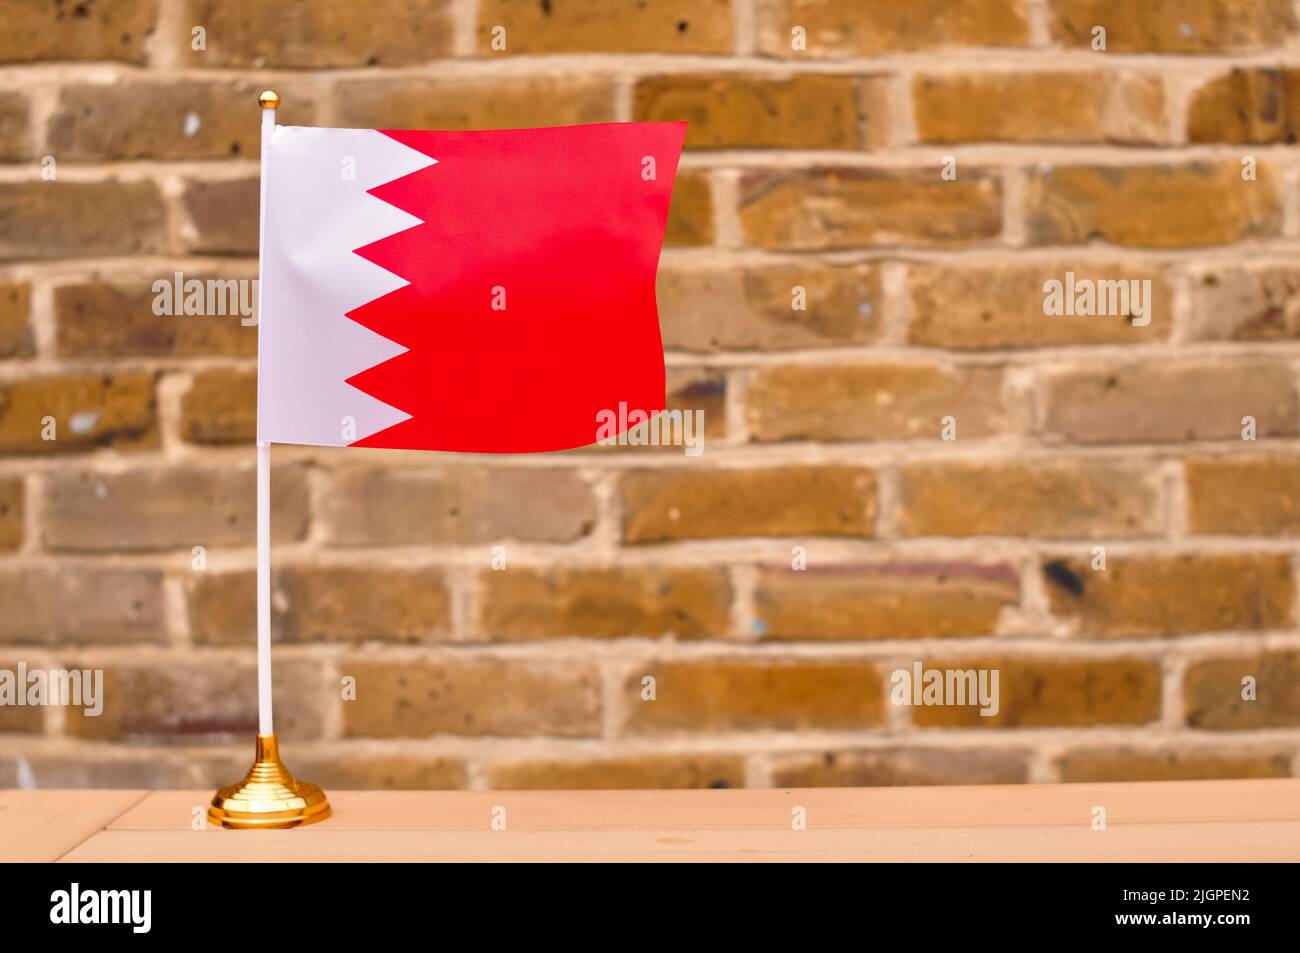 National colors of red and white on shirts hanging in store in Muharraq,  Bahrain, Middle East Stock Photo - Alamy